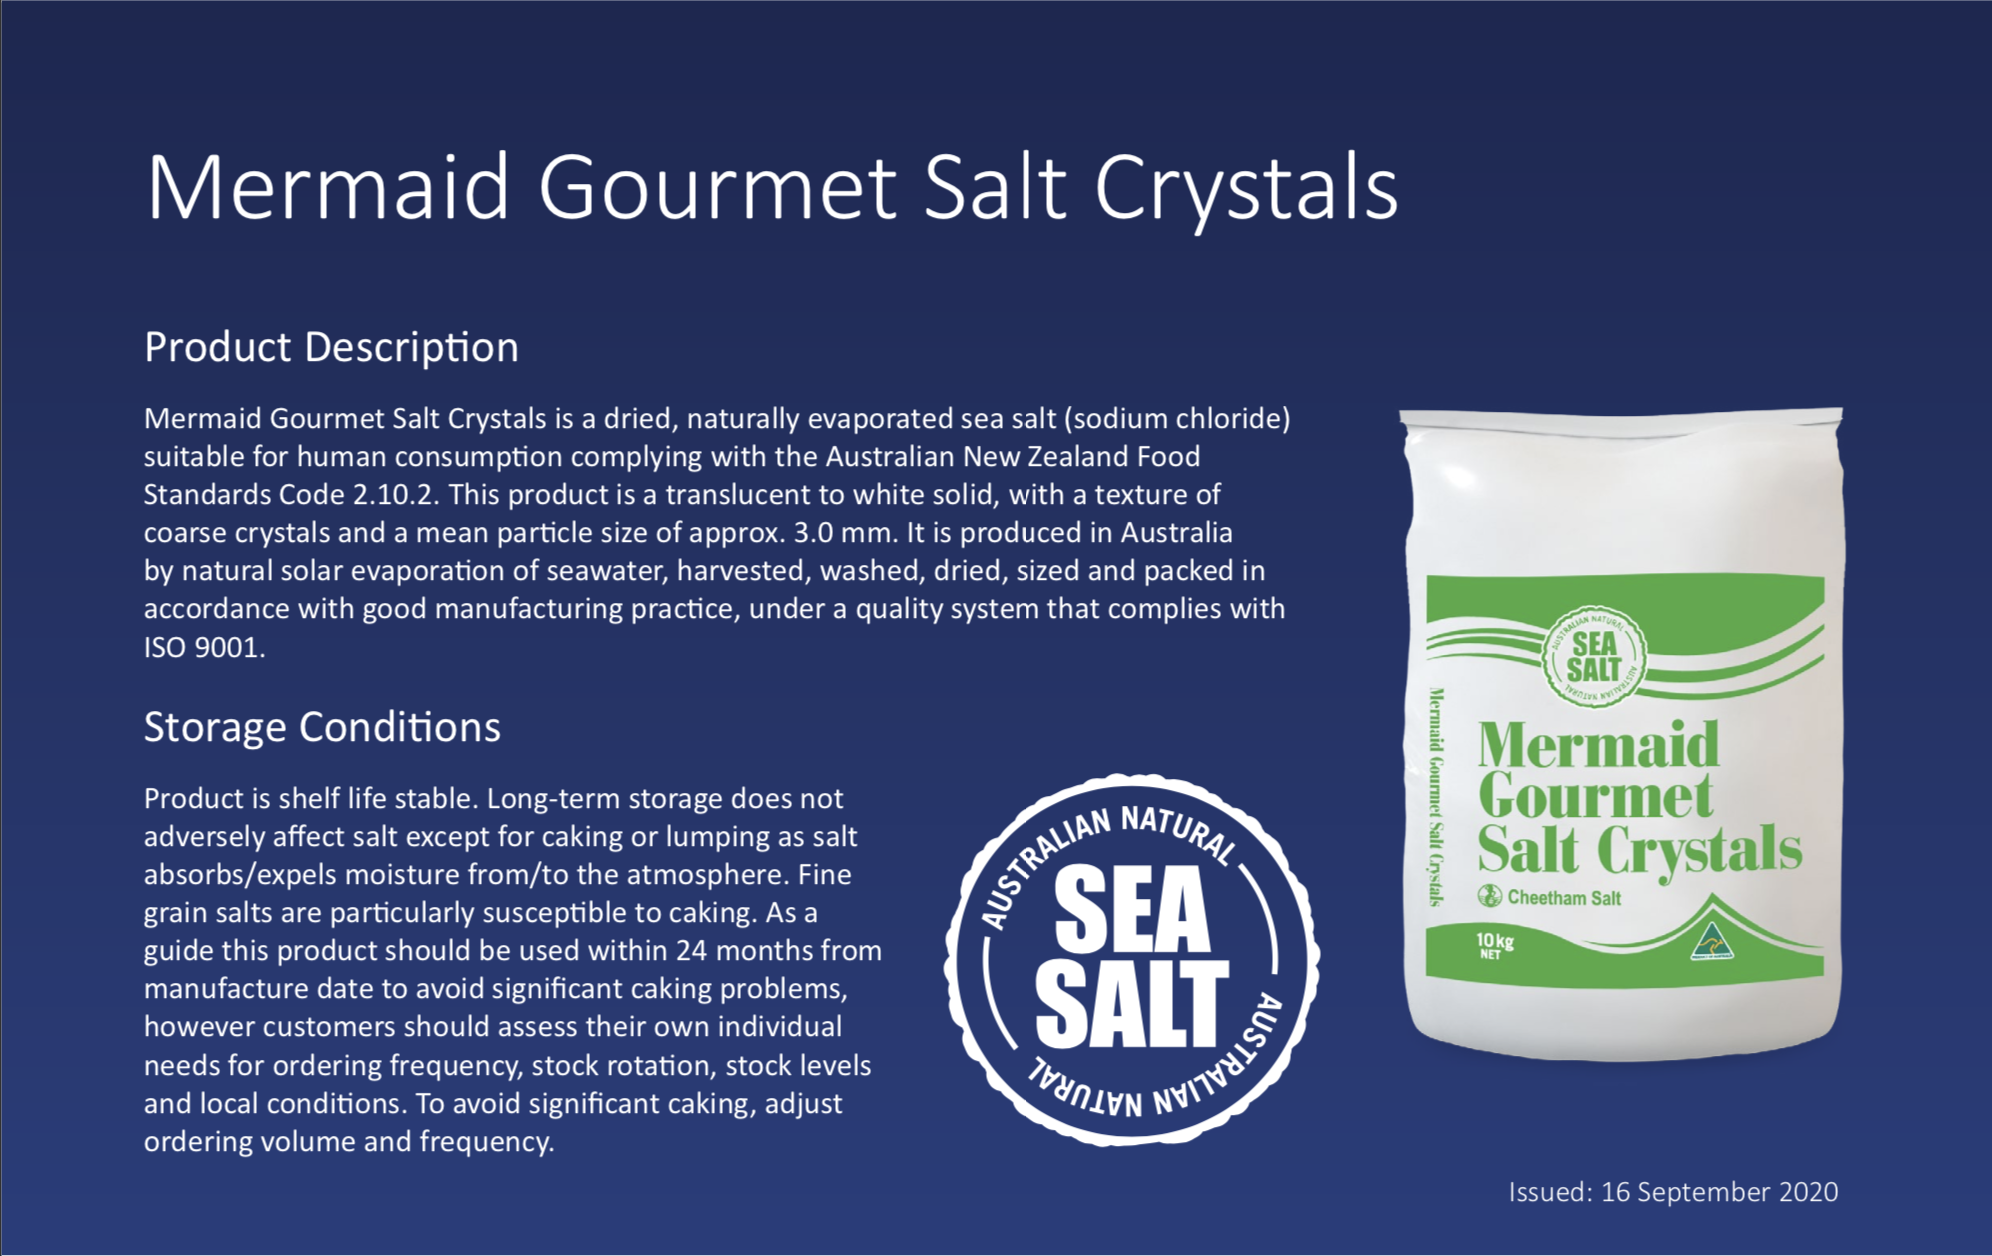 Mermaid Gourmet Salt Crystals product description. The product description includes details about the food grade salt, an image of the product, and storage conditions.